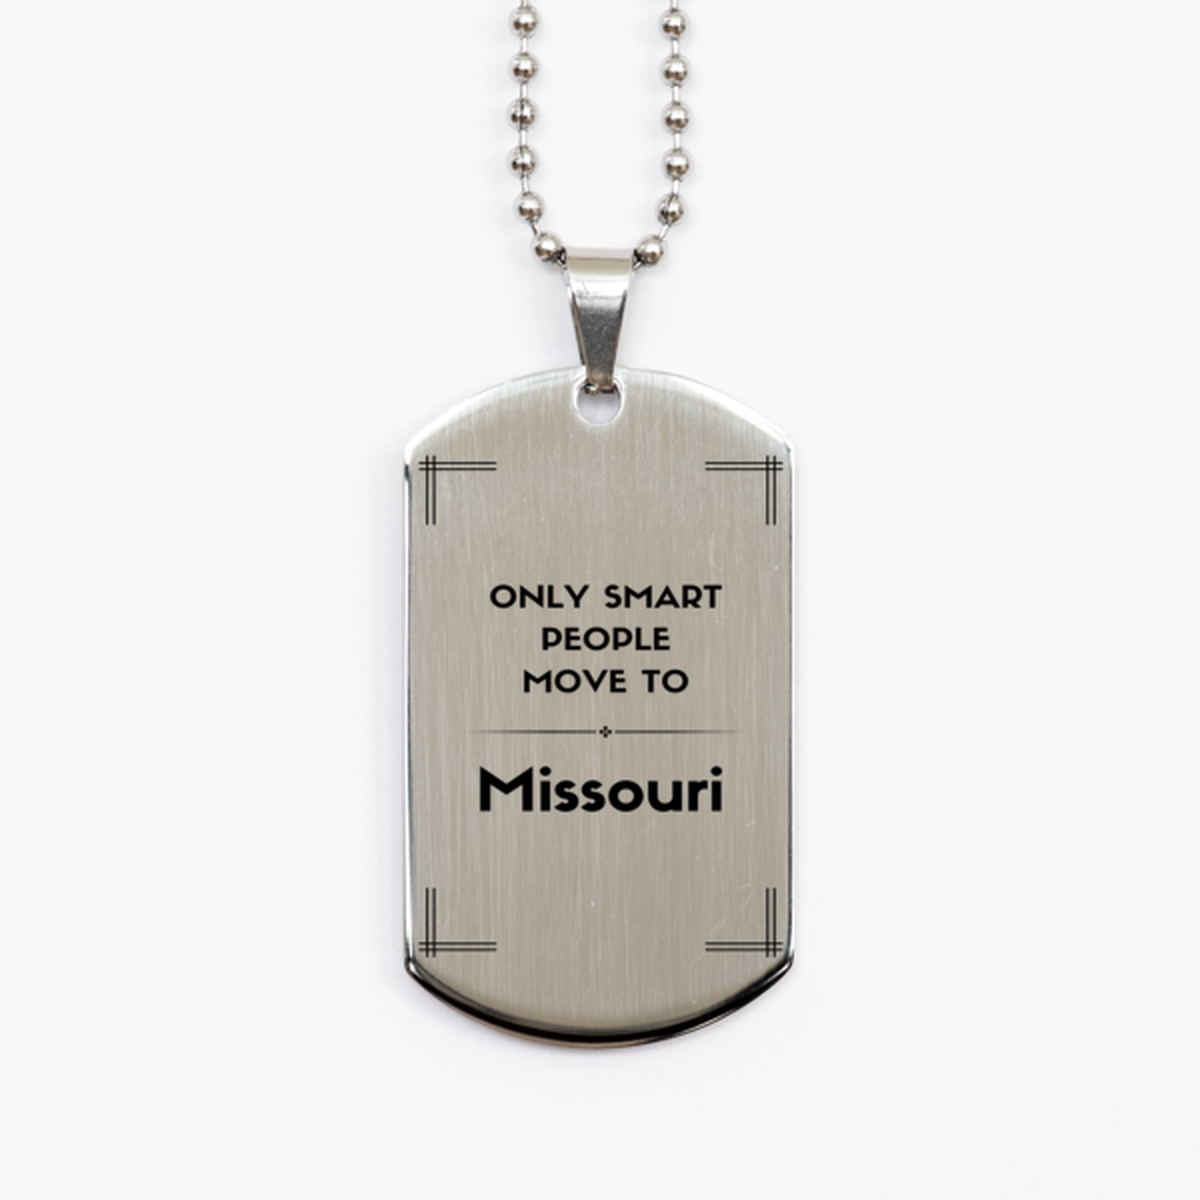 Only smart people move to Missouri Silver Dog Tag, Gag Gifts For Missouri, Move to Missouri Gifts for Friends Coworker Funny Saying Quote